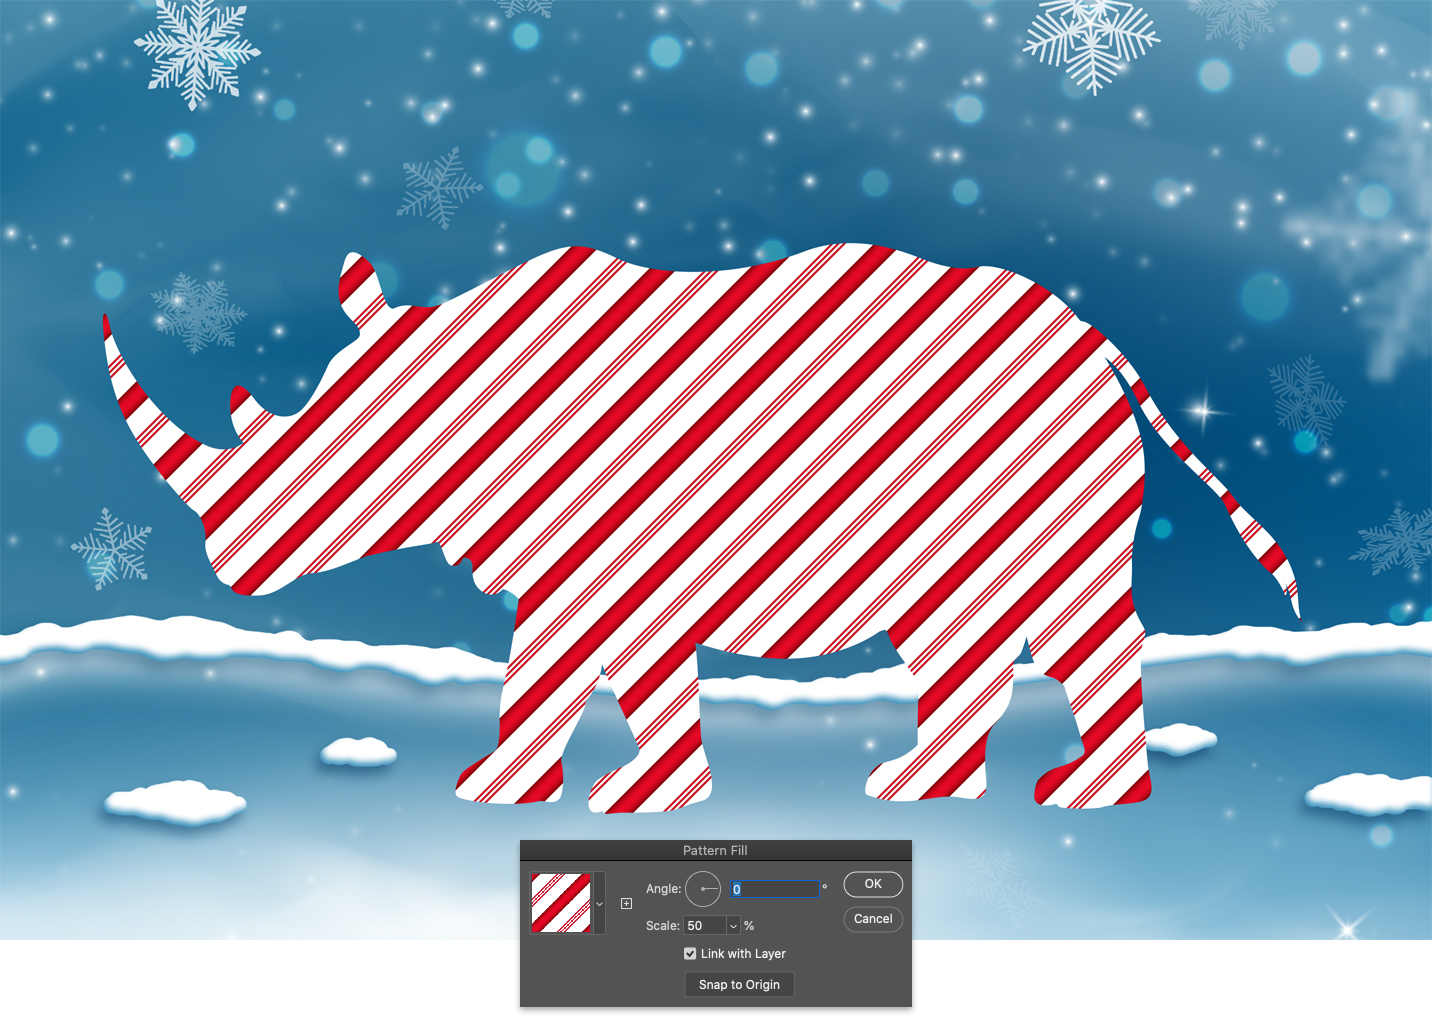 Rhino with candy cane pattern fill applied